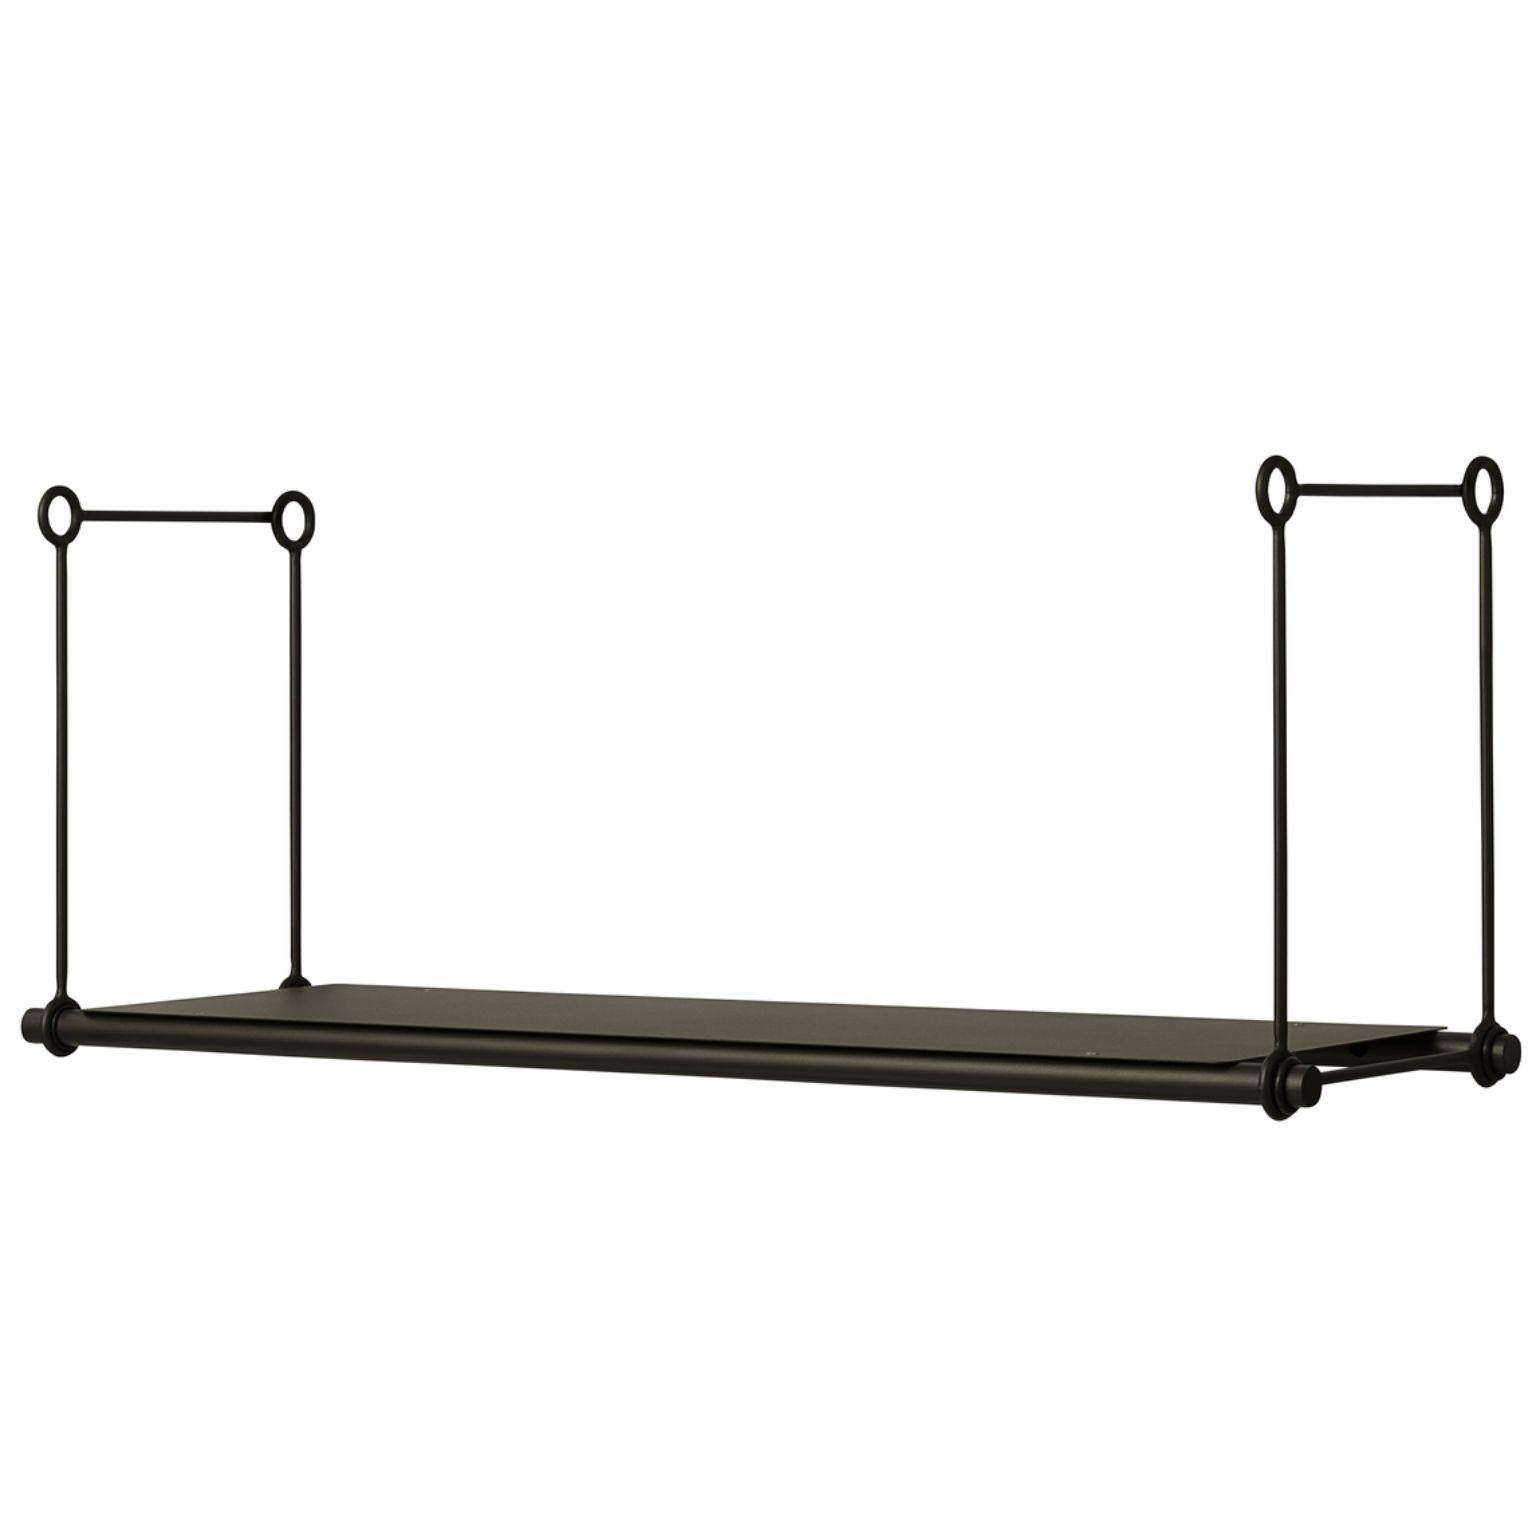 Parade 1 shelf extention green Olive by Warm Nordic
Dimensions: D100 x W30 x H39cm
Material: Powder coated steel
Weight: 4 kg
Also available in different colors and dimensions. 

Elegant metal shelving unit with plenty of space for all your